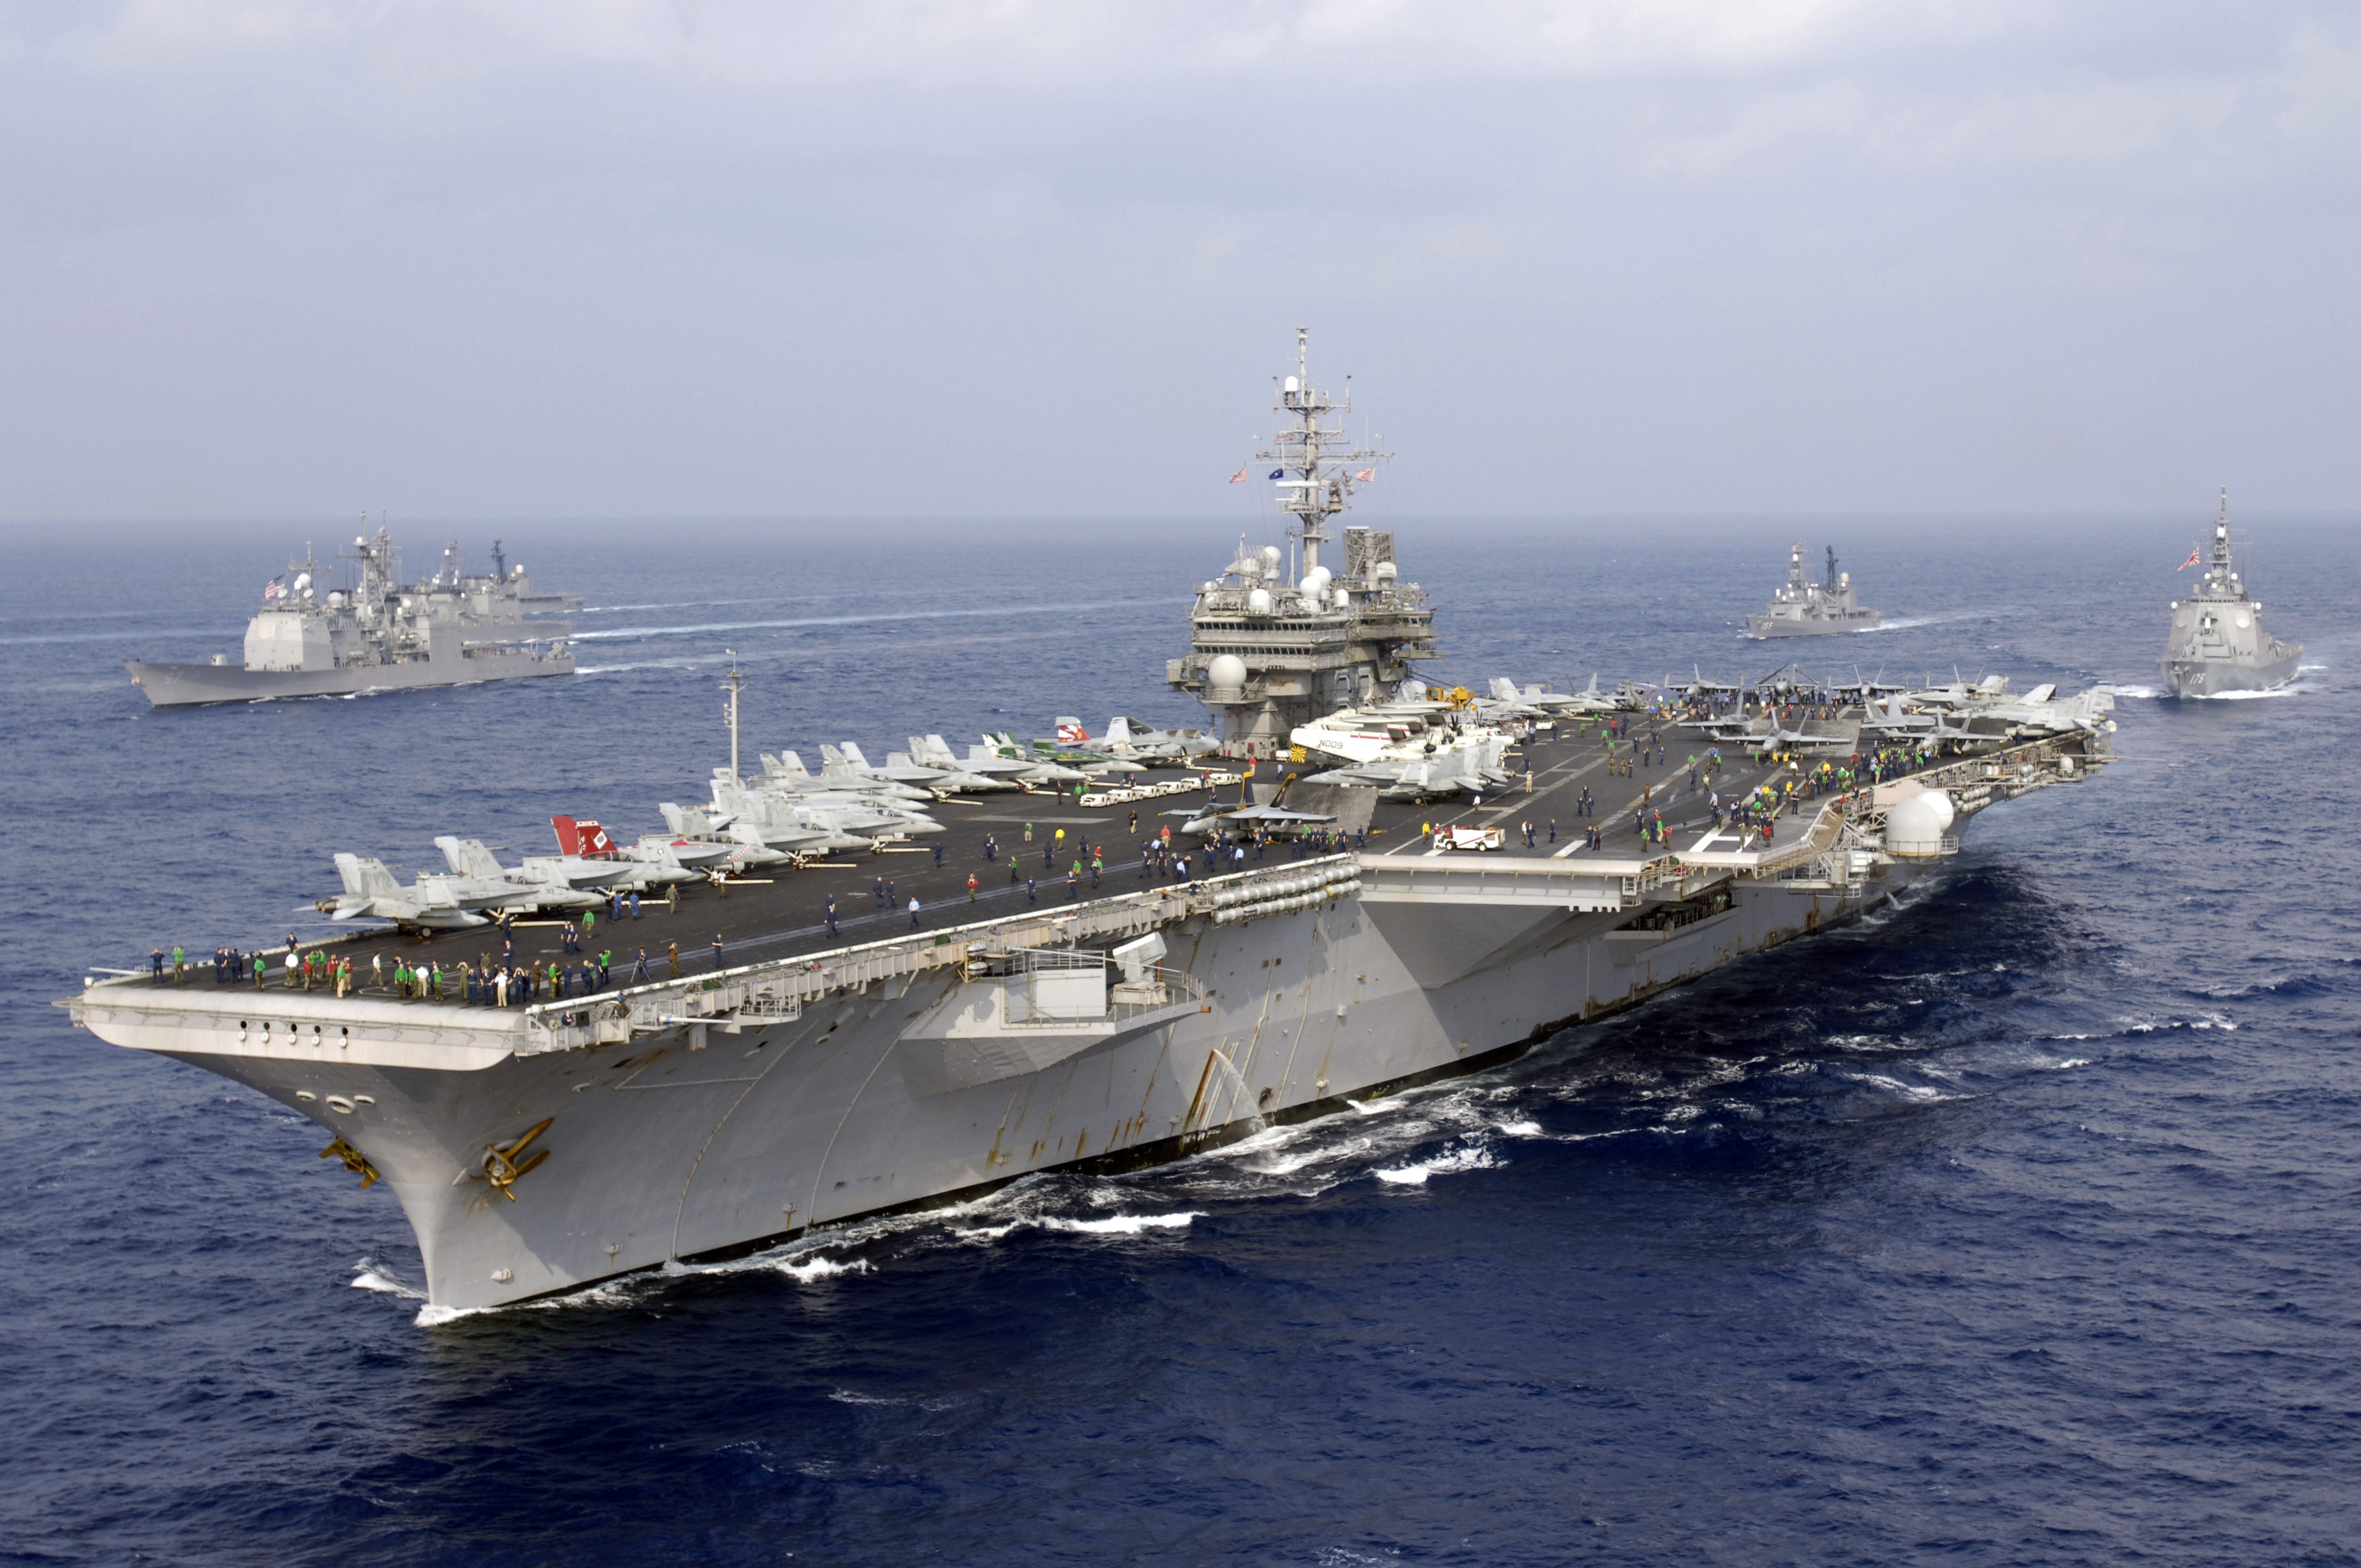 US_Navy_071116-N-7883G-101_The_aircraft_carrier_USS_Kitty_Hawk_%28CV_63%29_and_other_American_and_Japan_Maritime_Self-Defense_Forces_%28JMSDF%29_ships_transit_together_at_the_end_of_ANNUALEX_19G,_the_maritime_component_of_the_U.S.-Japa.jpg